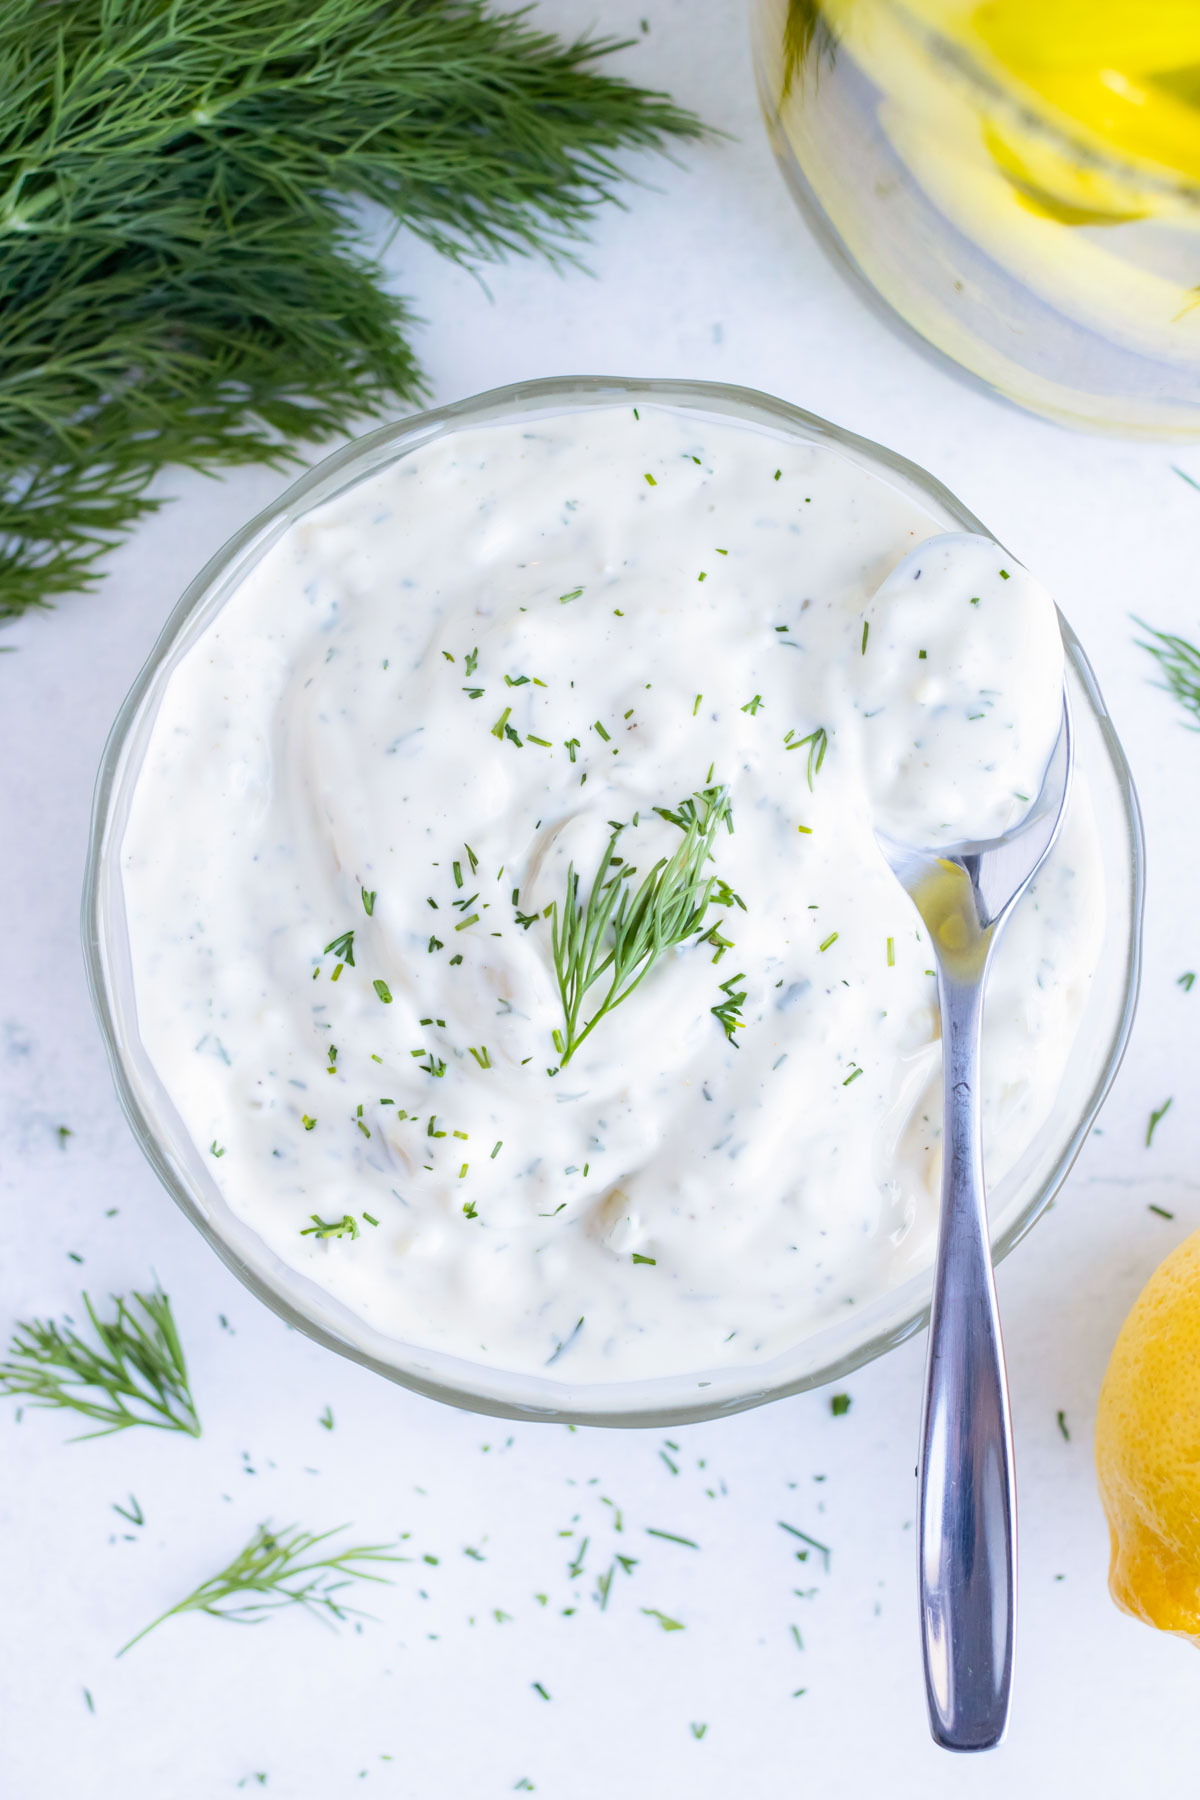 Fresh tartar sauce is served with main dishes and appetizers for an easy sauce or dip recipe.